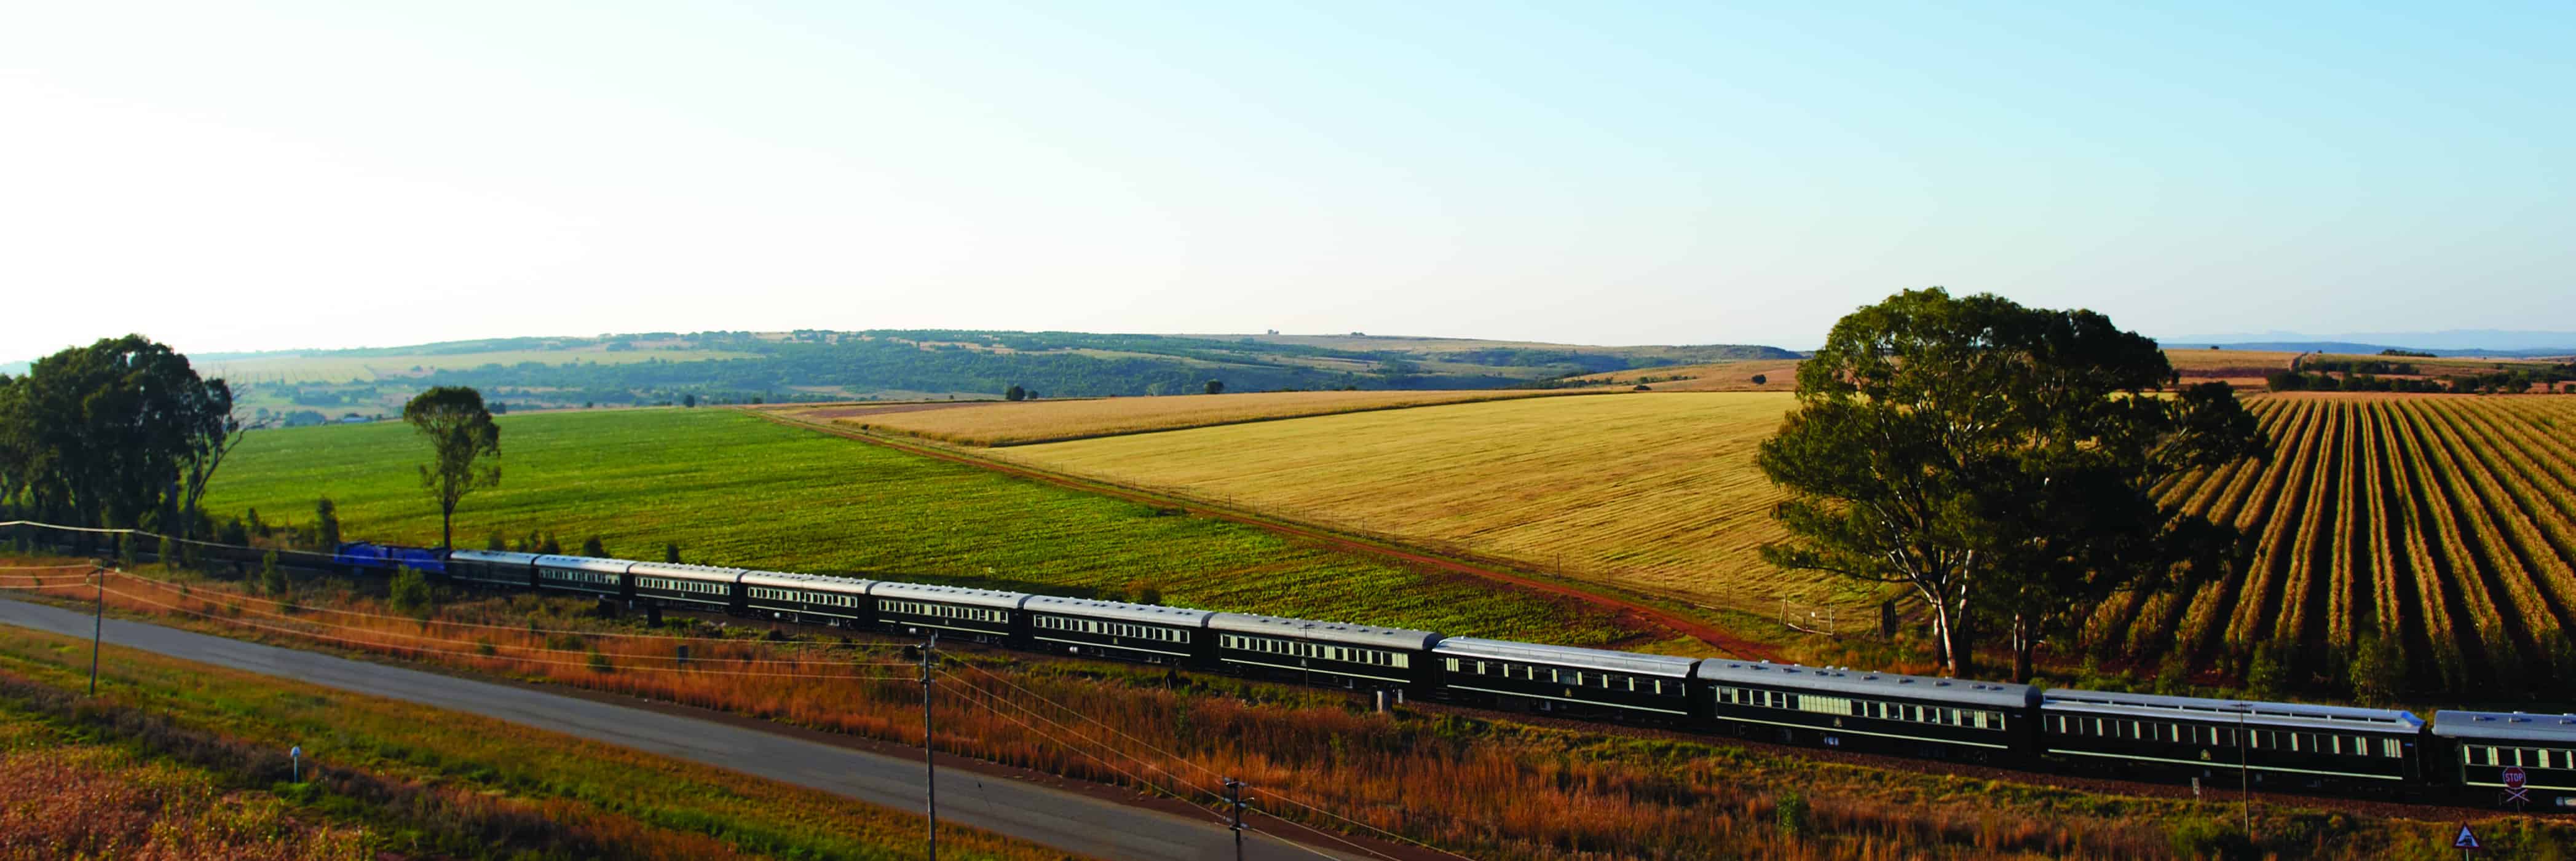 Rail Travel in South Africa